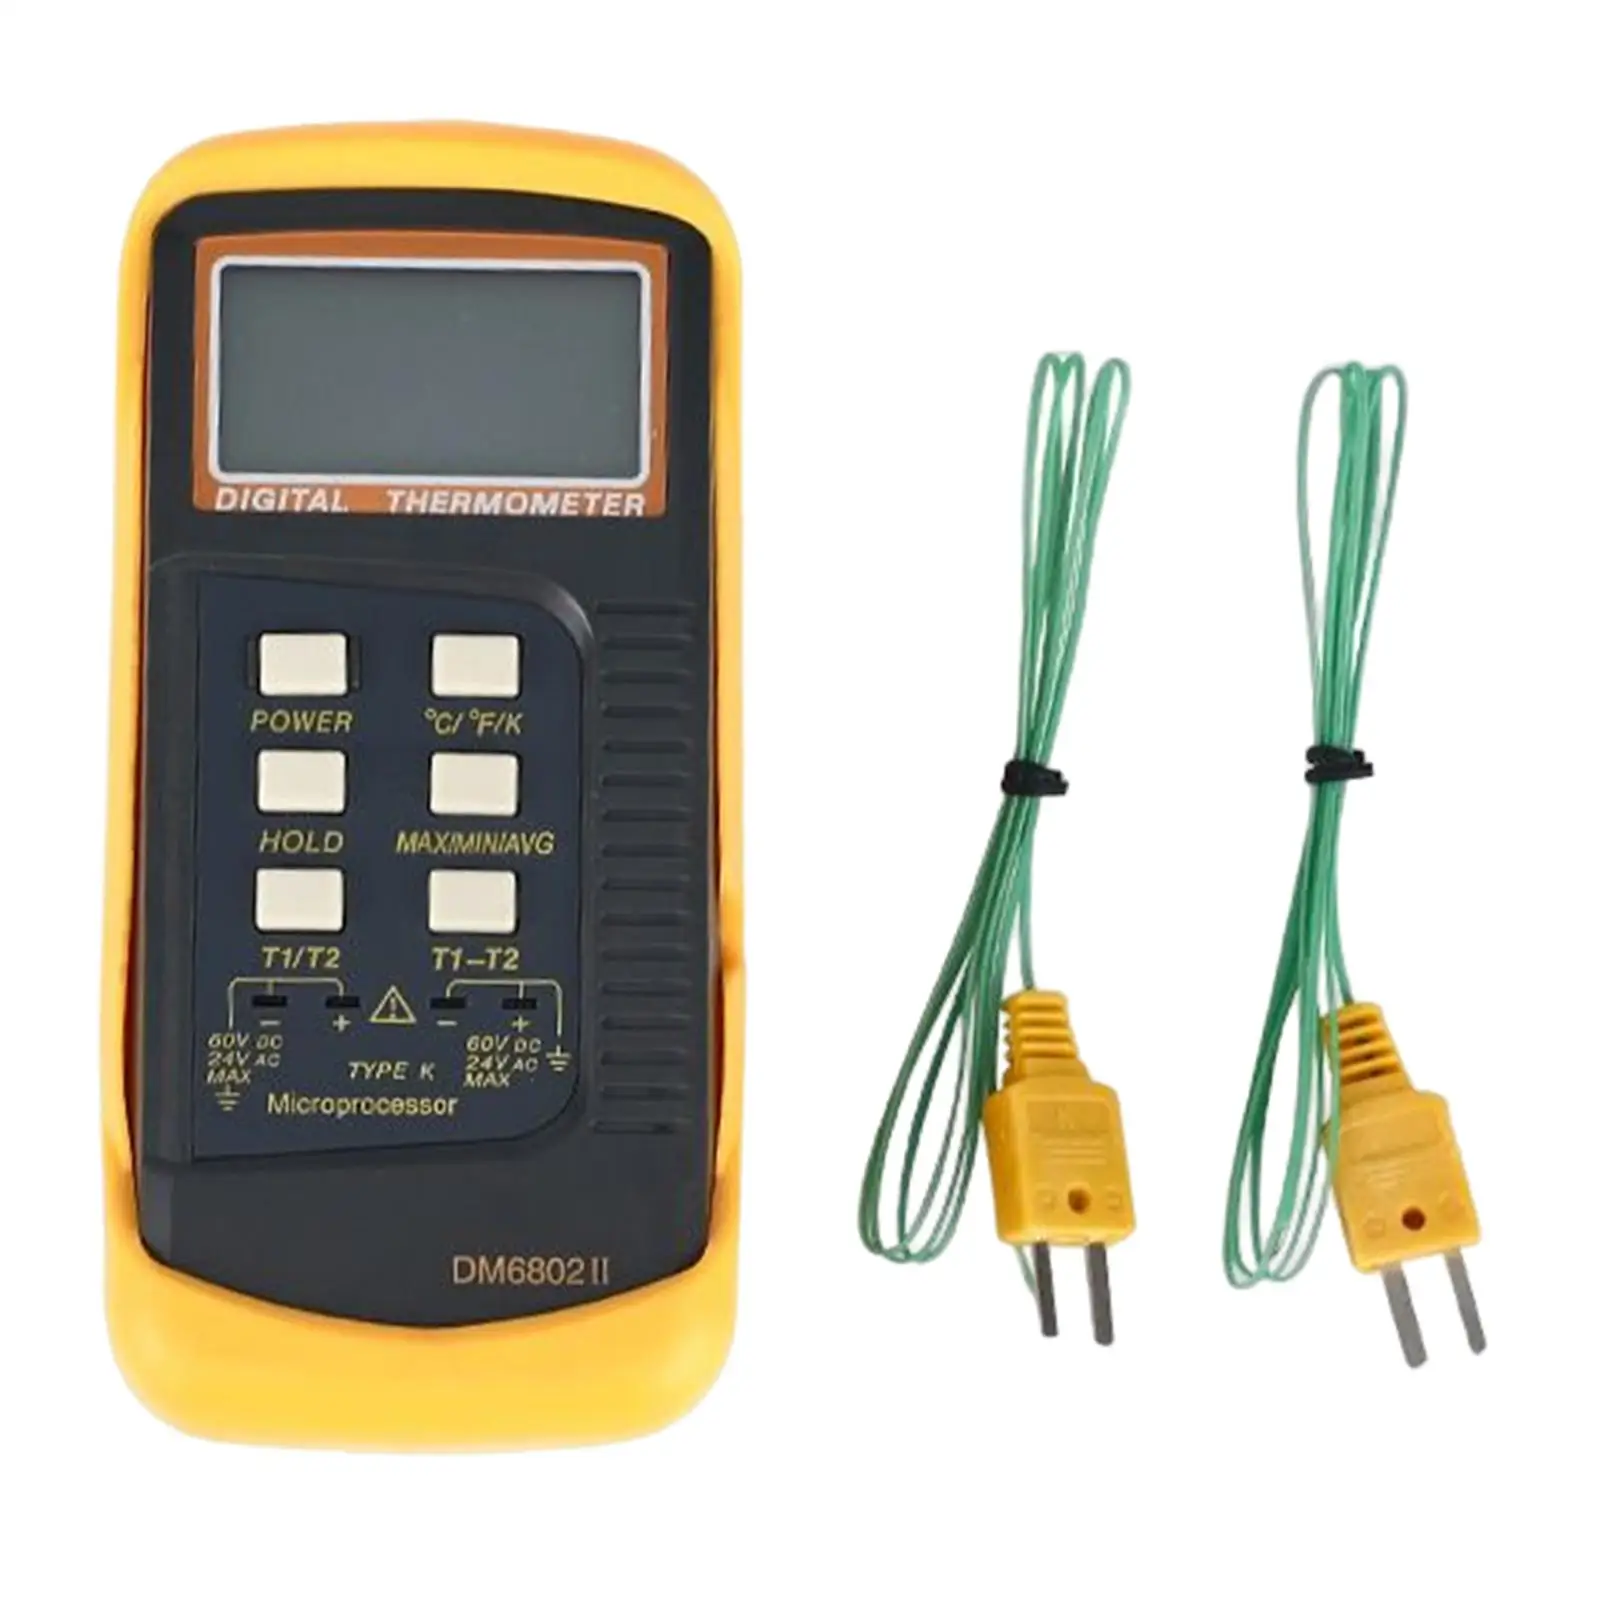 6802II Thermometer Temperature Meter Two Channels Measurement Meter Handheld with Pipe Clamp